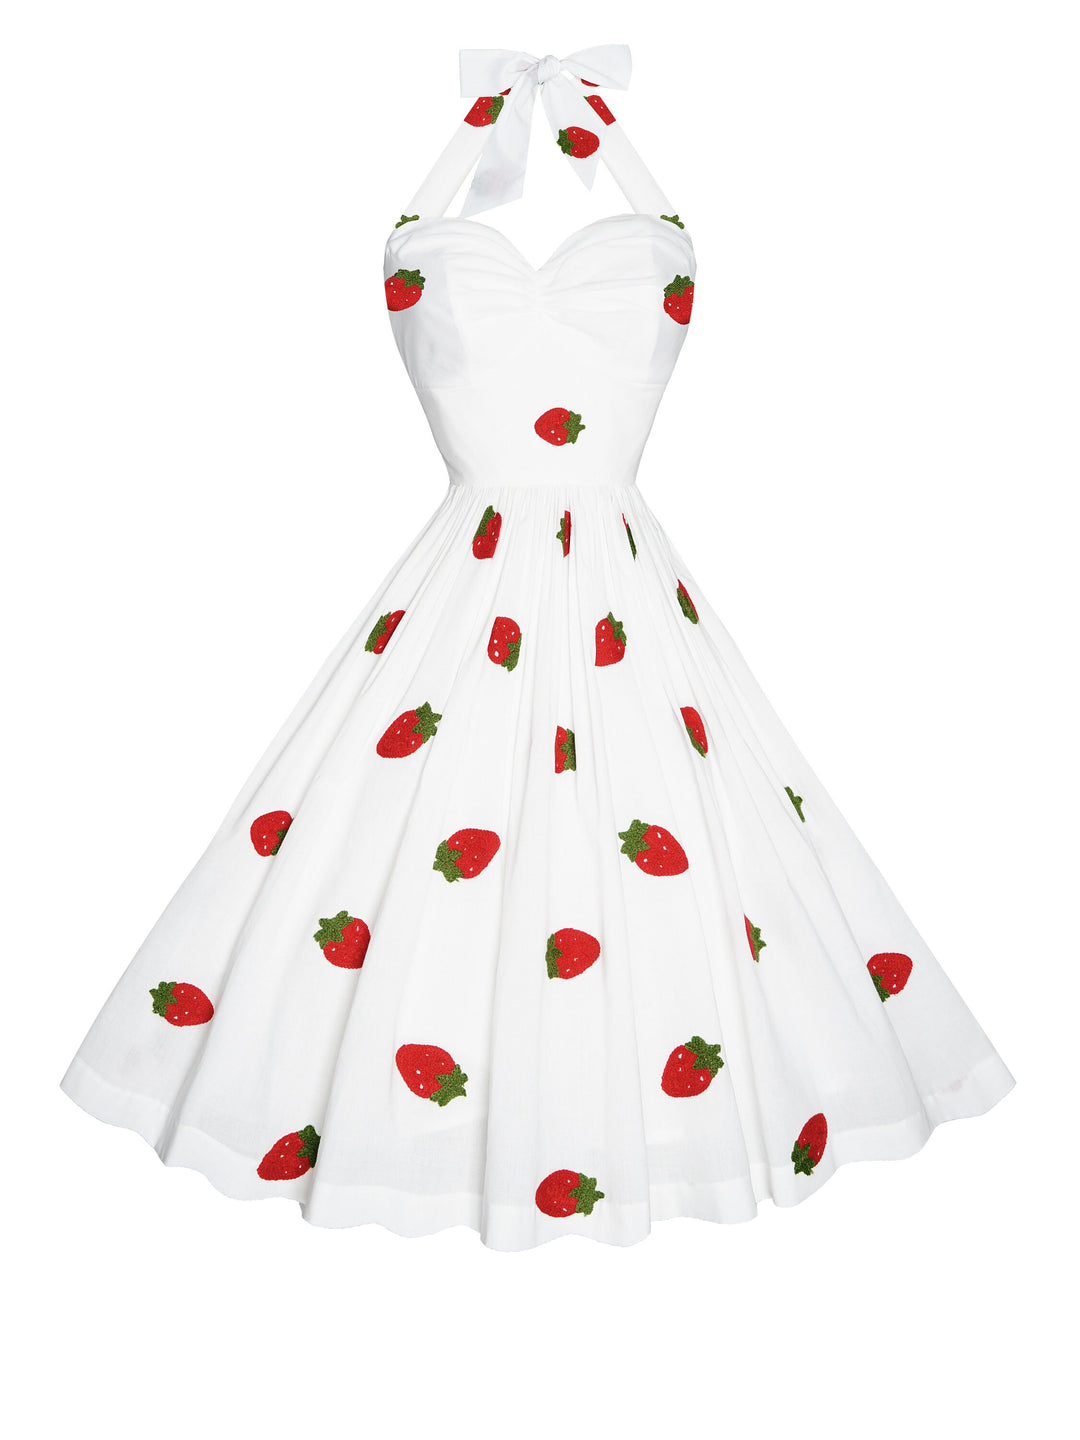 Fabric "Strawberry Delight" Eyelet - By the Yard